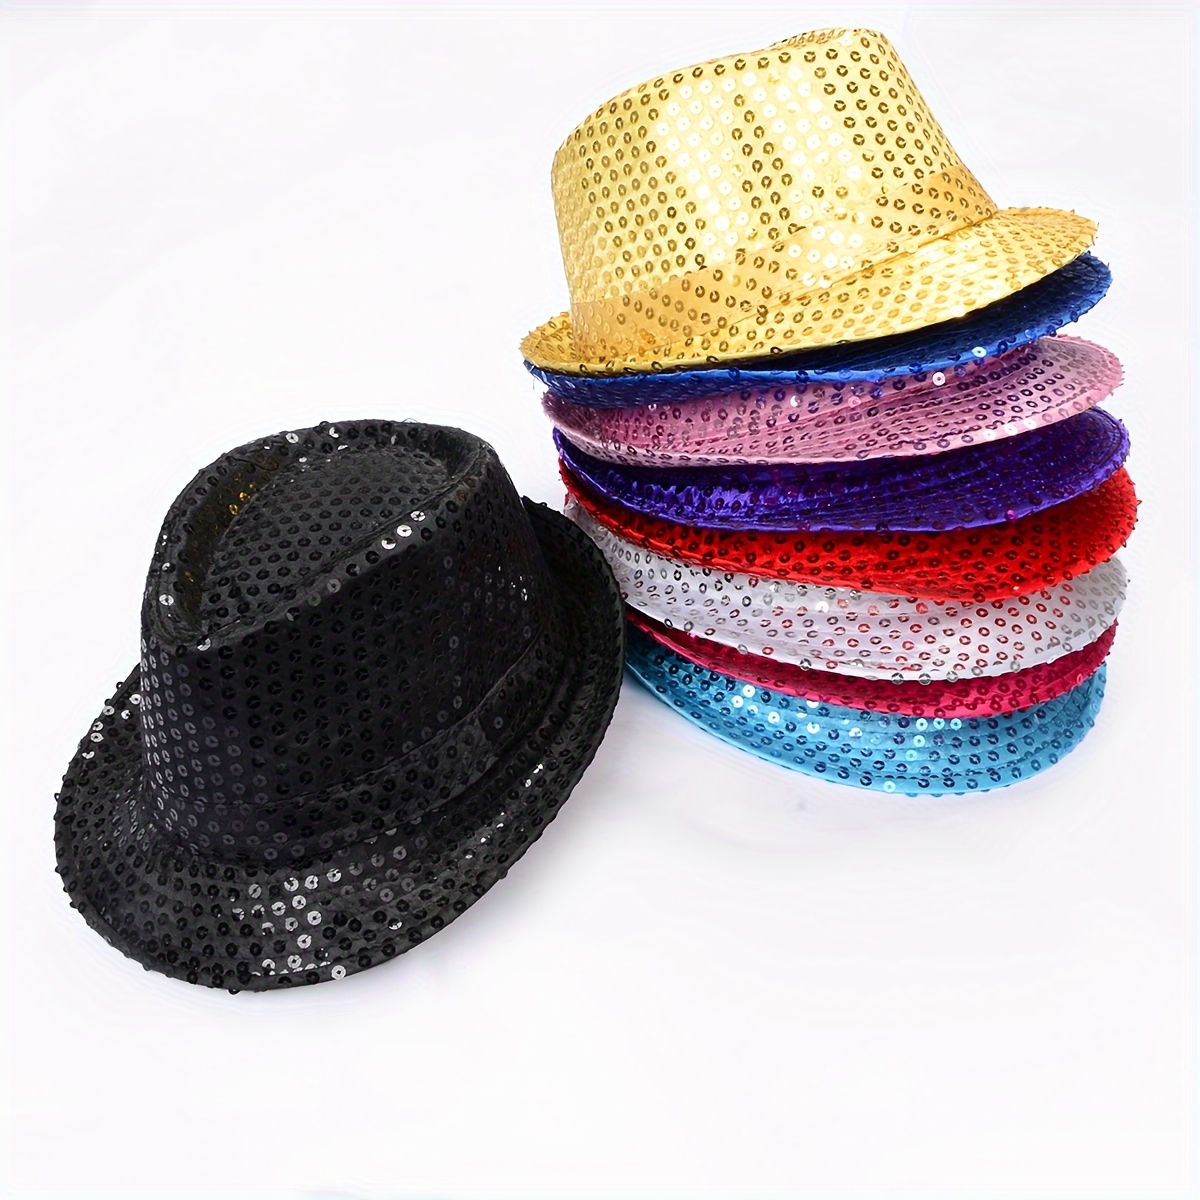 

Unisex Sparkling Sequin Fedora Hat For Parties & Performances - Fashionable Jazz Cap With Non-stretch Polyester, Knit Design